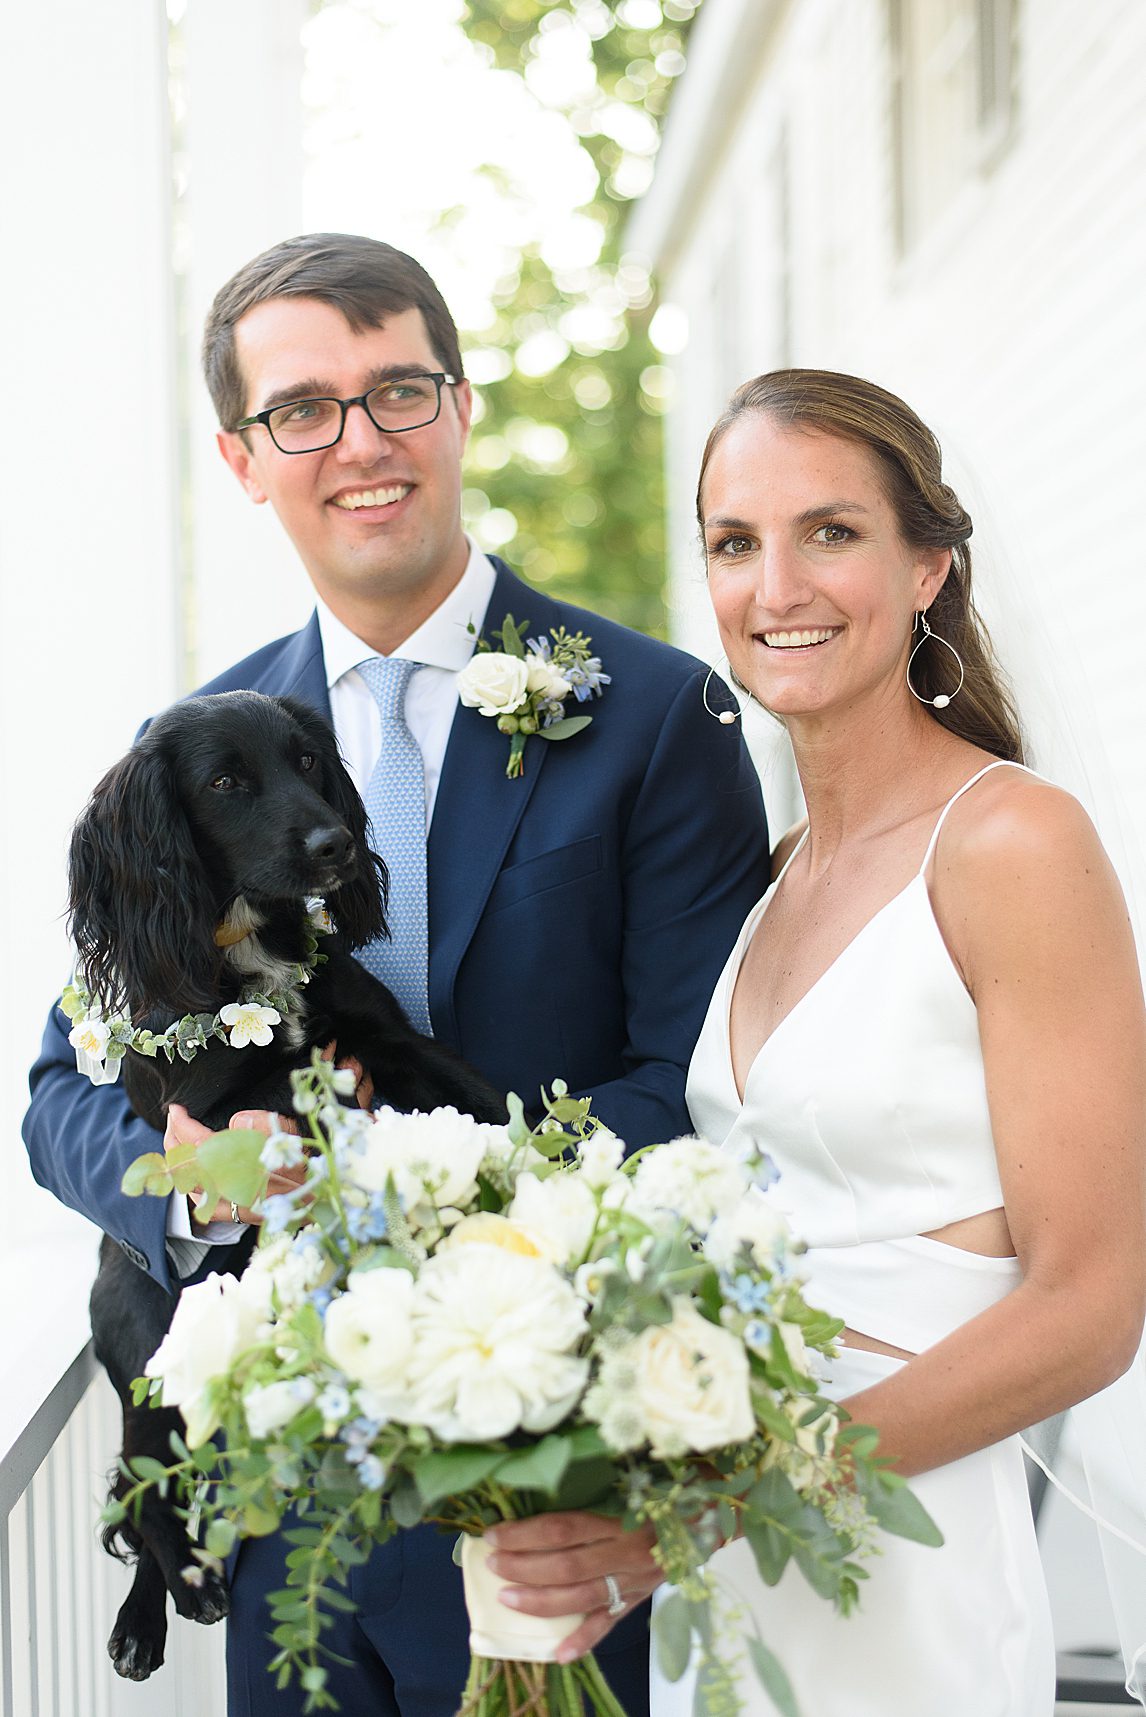 Bride and groom, posing with dog.